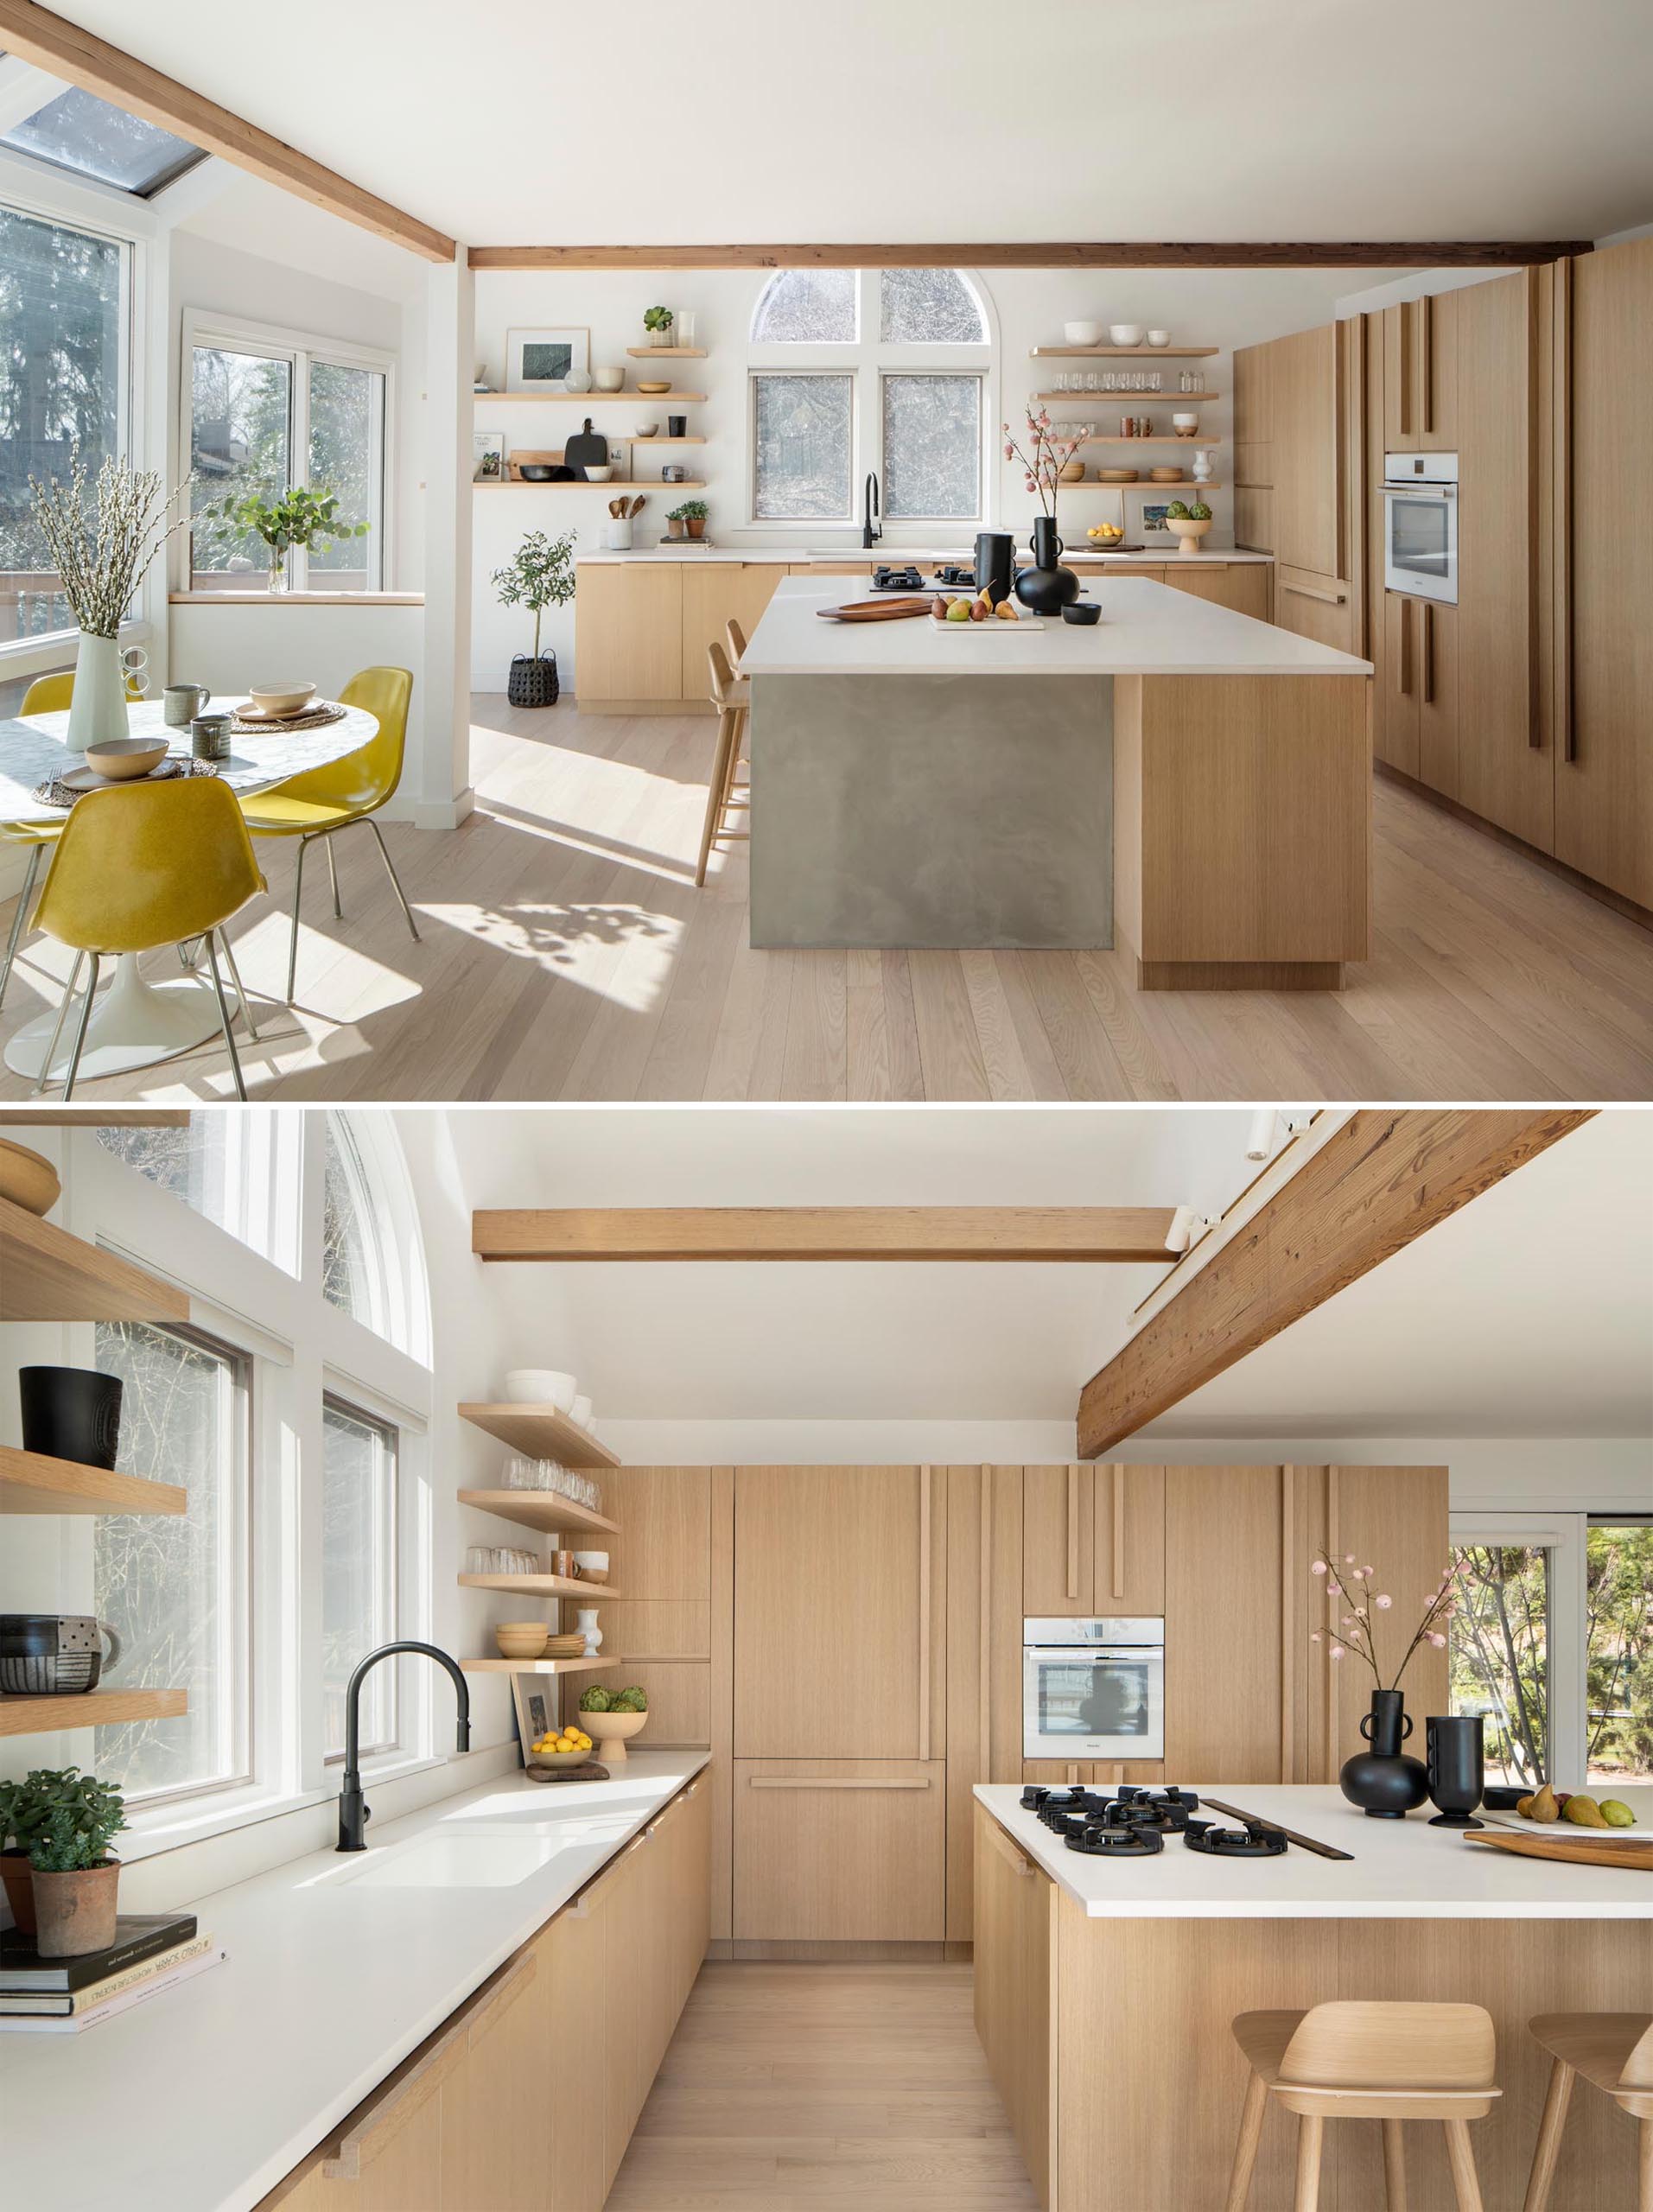 A remodeled kitchen with water-based white rift oak for the cabinets, a large island, and quartz countertops.